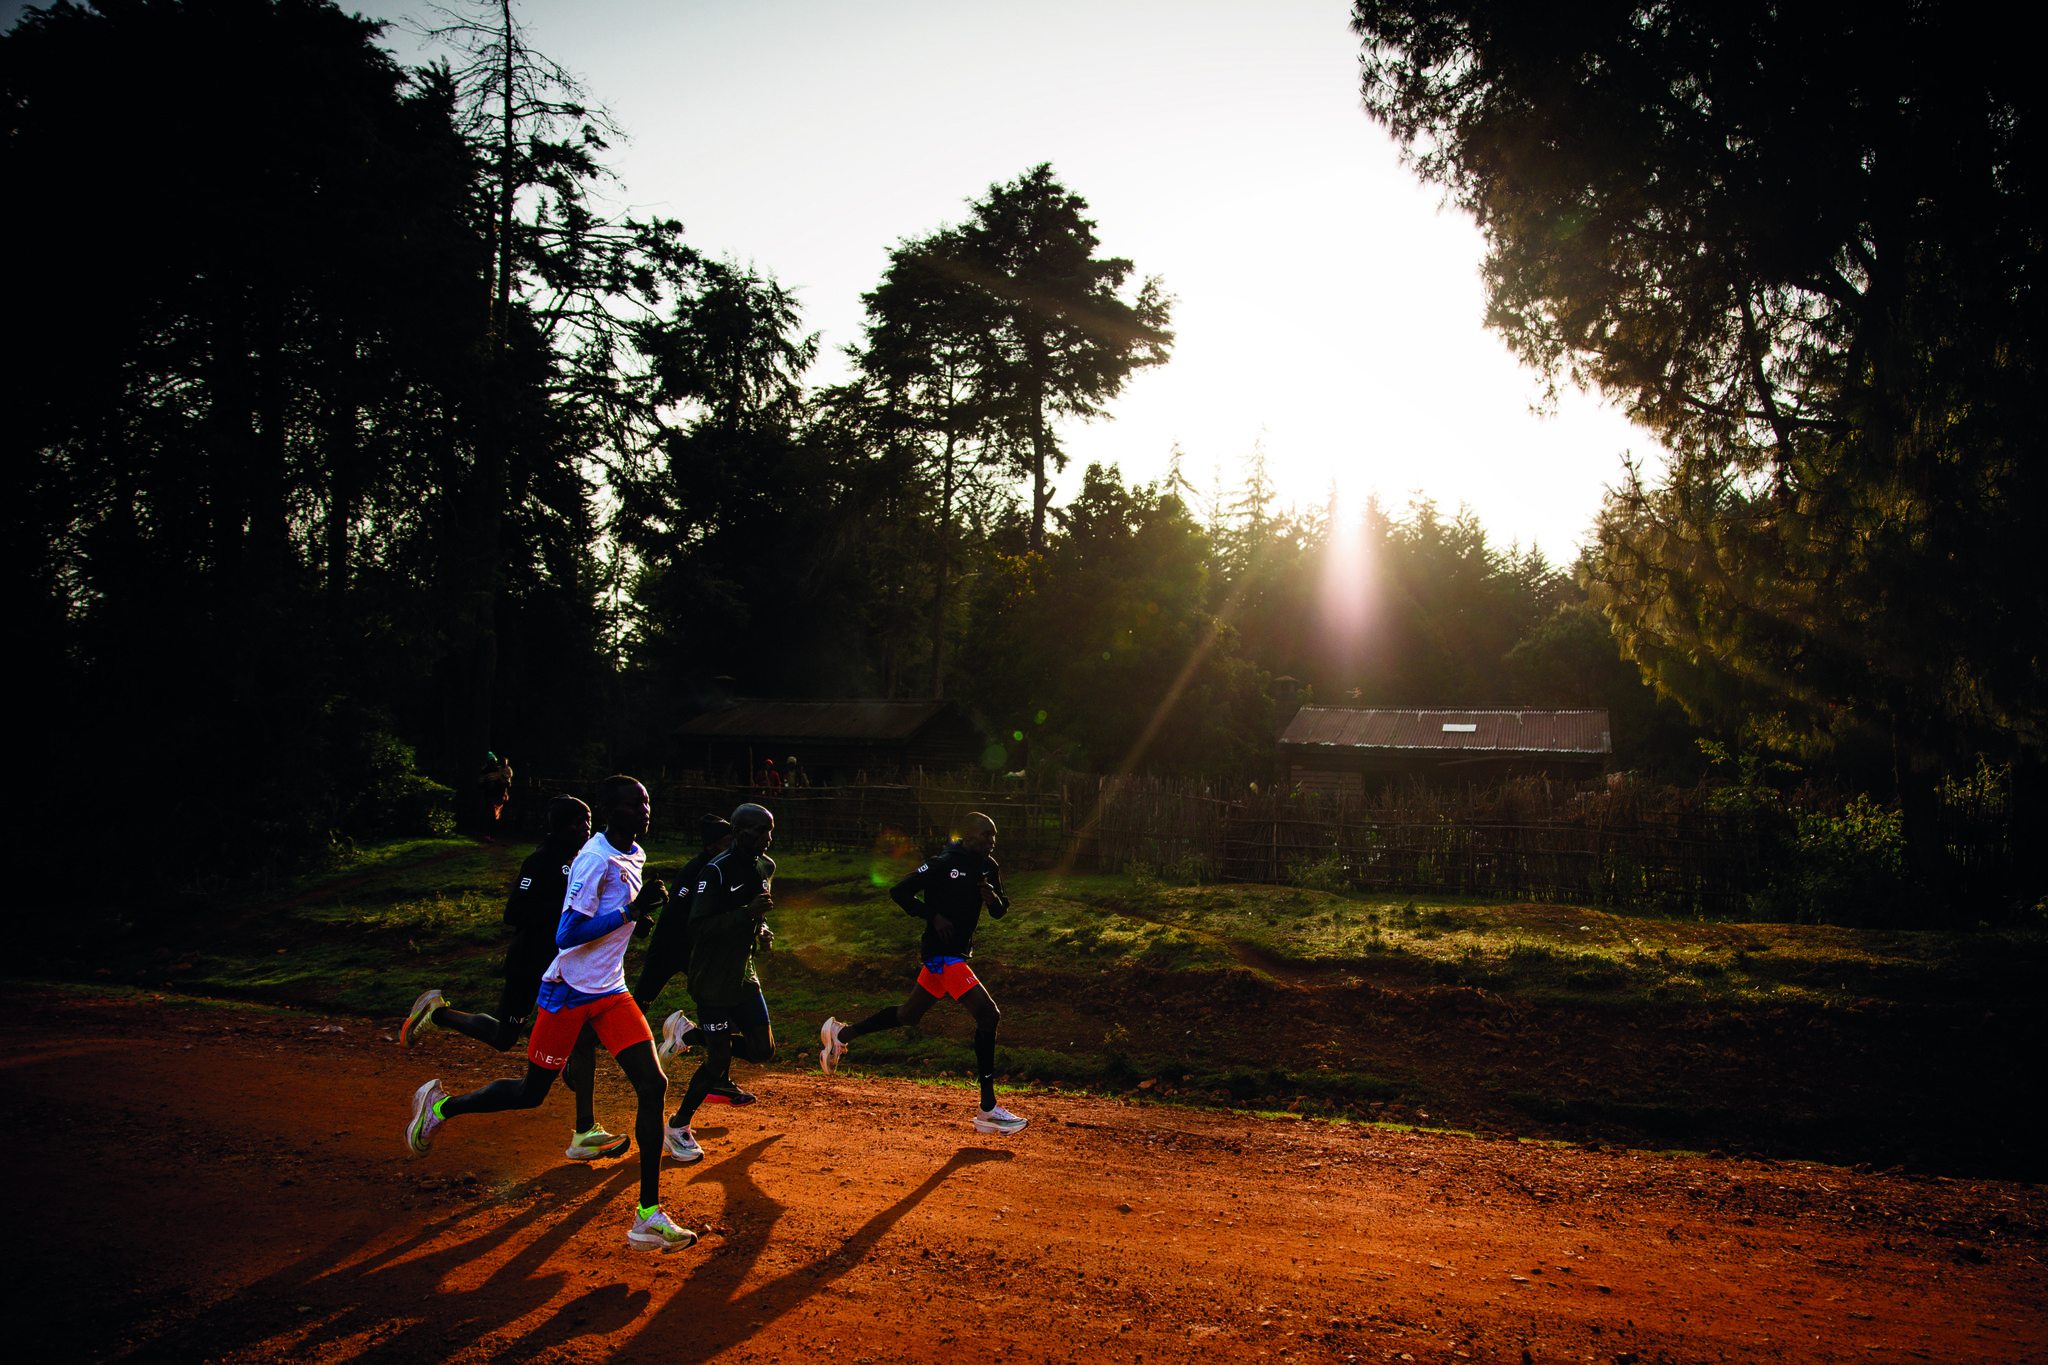 kipchoge center and some of his nn running teammates during a thursday 30k long run in the forest of kaptagat